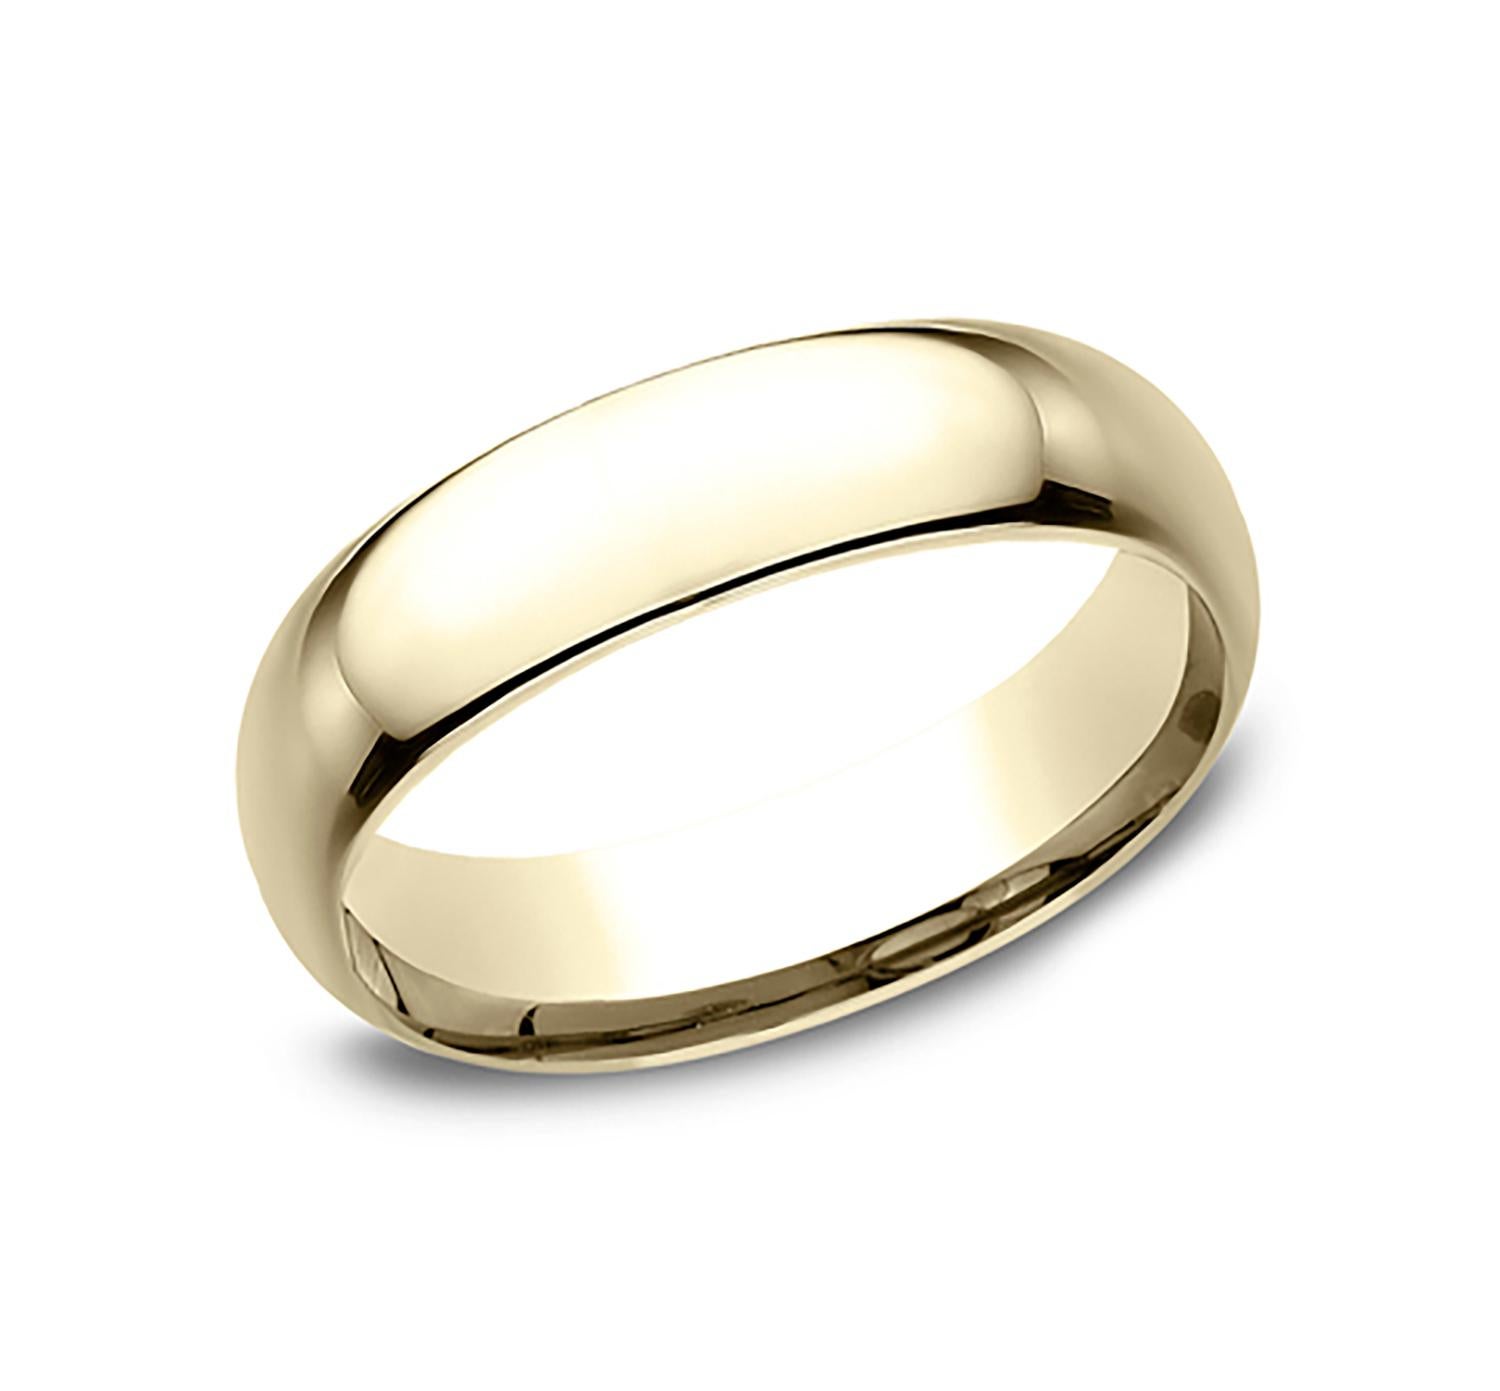 Benchmark wedding band in 14K yellow gold polished finish. Width 6mm, high dome comfort fit. Custom engraving and finishing available. Size 8 US and resizable upon request. Available in 1/4, 1/2, and 3/4 sizes, for more information please message us